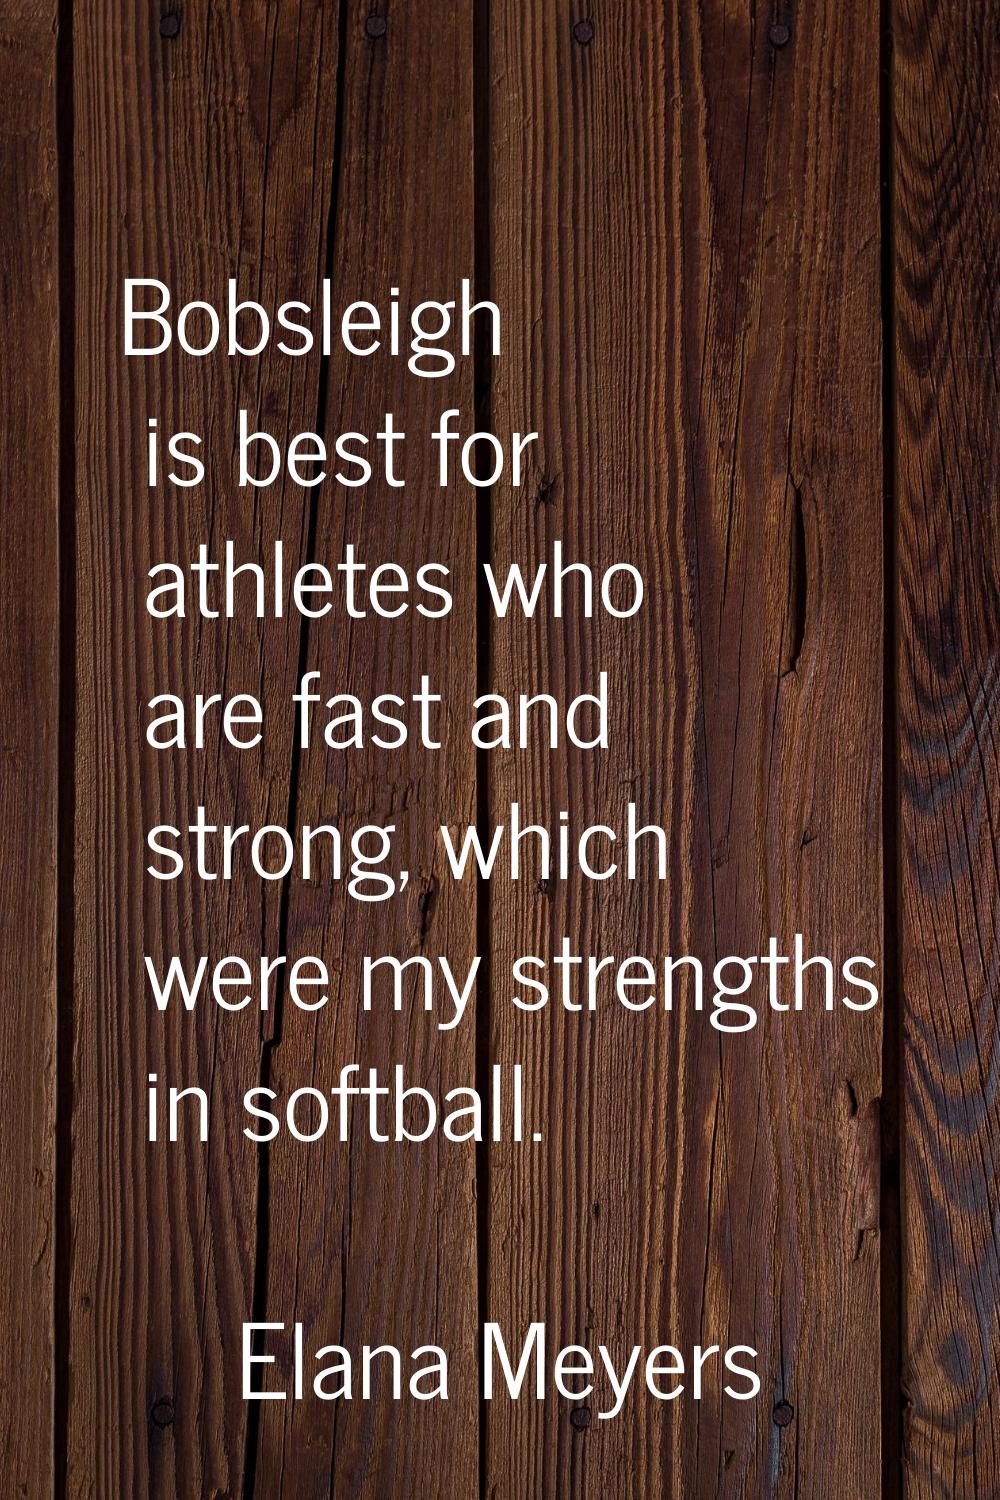 Bobsleigh is best for athletes who are fast and strong, which were my strengths in softball.